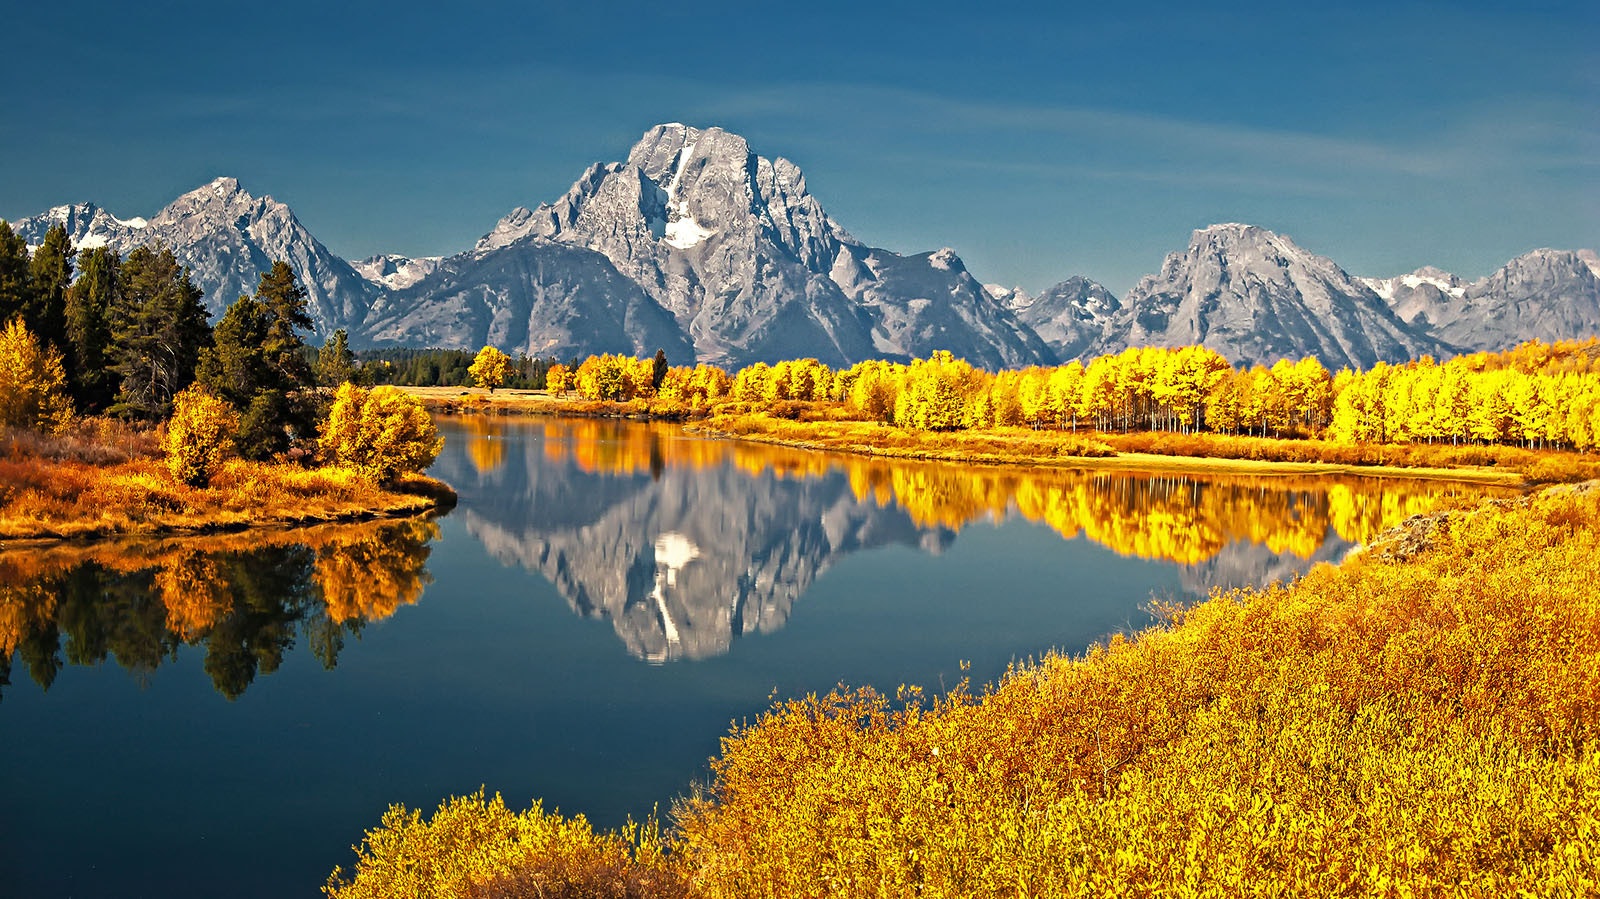 Mount Moran is reflected in Oxbow Bend in Grand Teton National Park in Wyoming, a favorite scene for photographers seeking stunning images of fall colors.